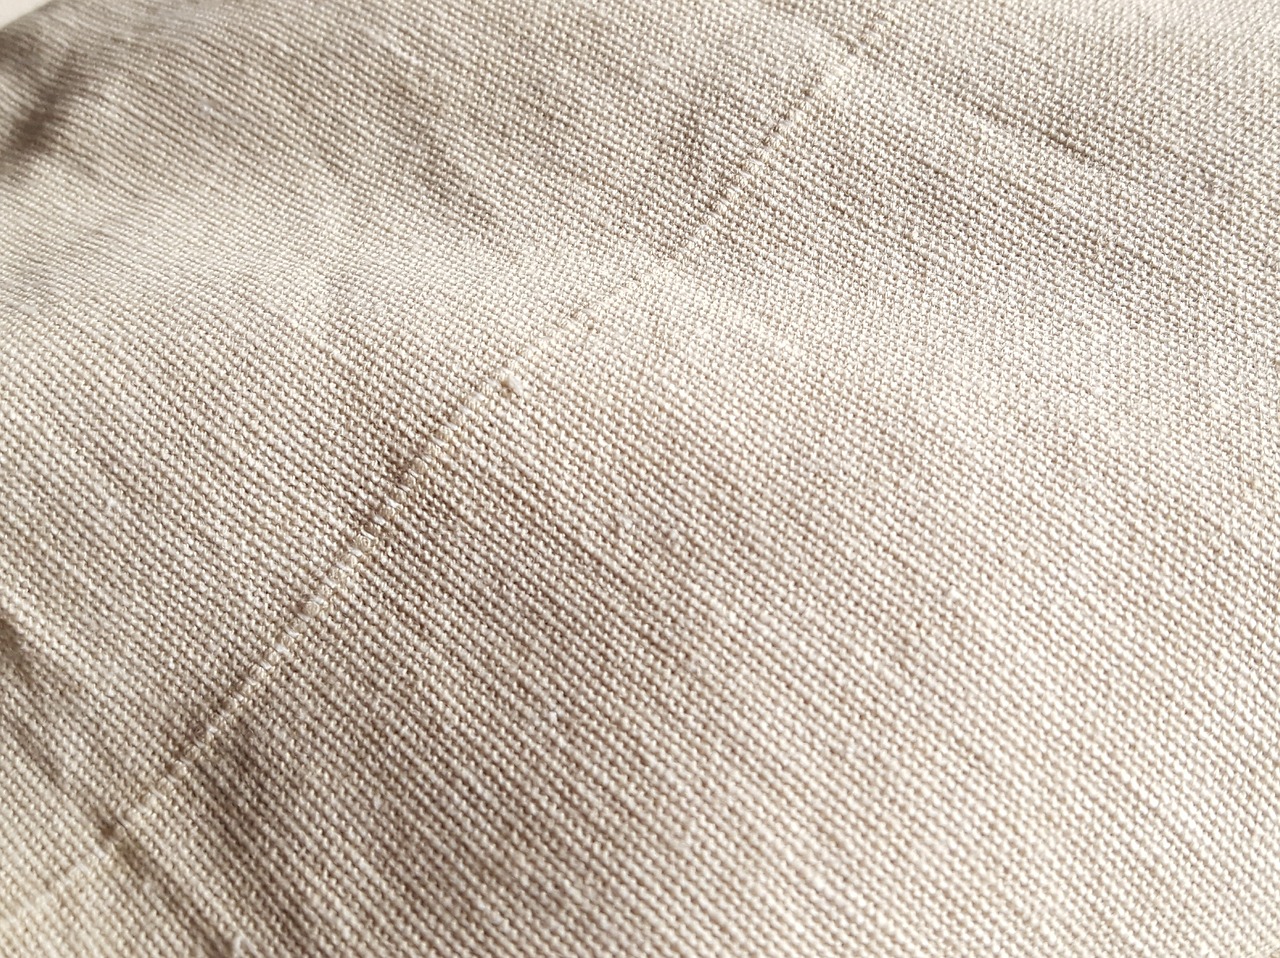 uses of linen